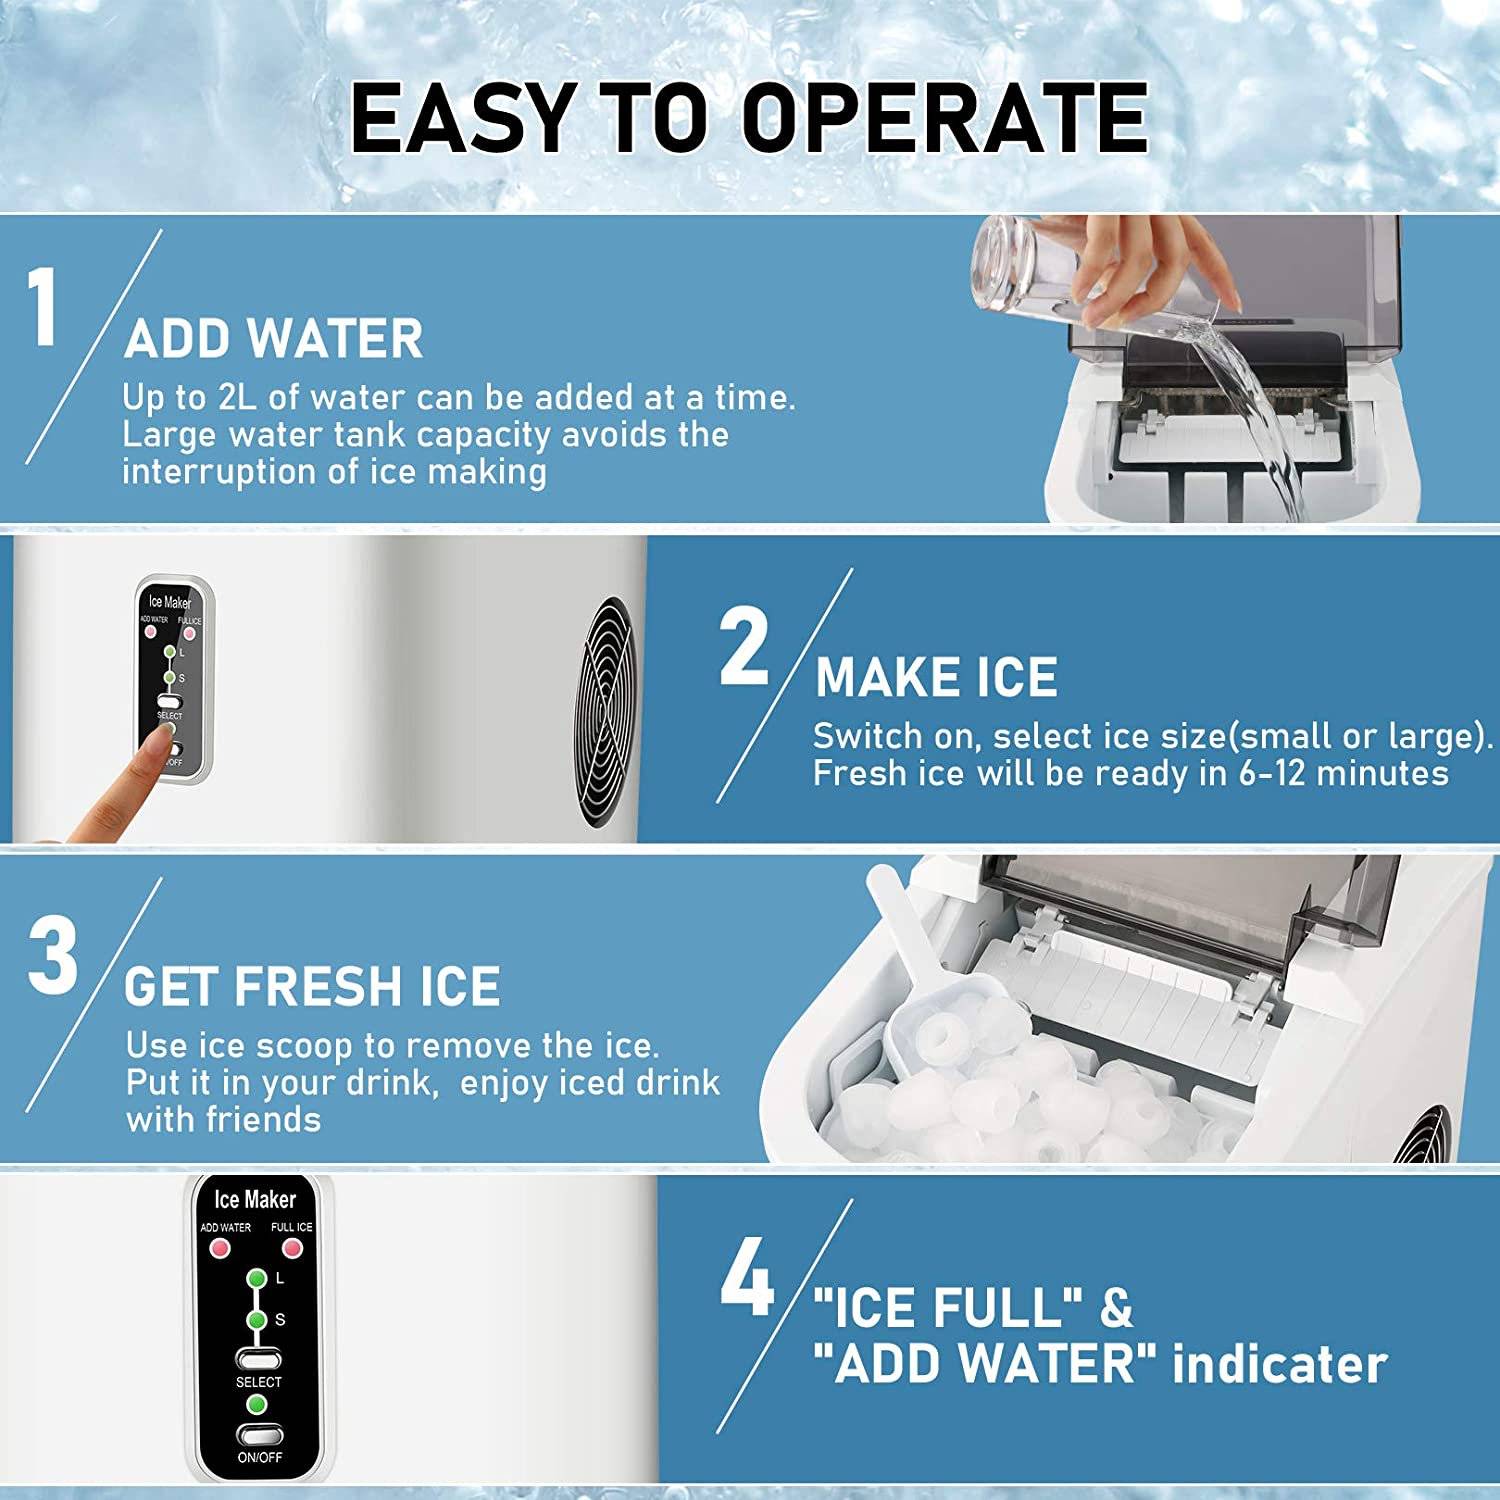 AICOOK Nugget Ice Maker For Countertop, Sonic Ice Maker Machine, Makes 26Lb  Pebble Ice Per Day, Crunchy Pellet Ice Maker With 5.3Lb Ice Bin And Scoop  For Home Office, Self-Cleaning